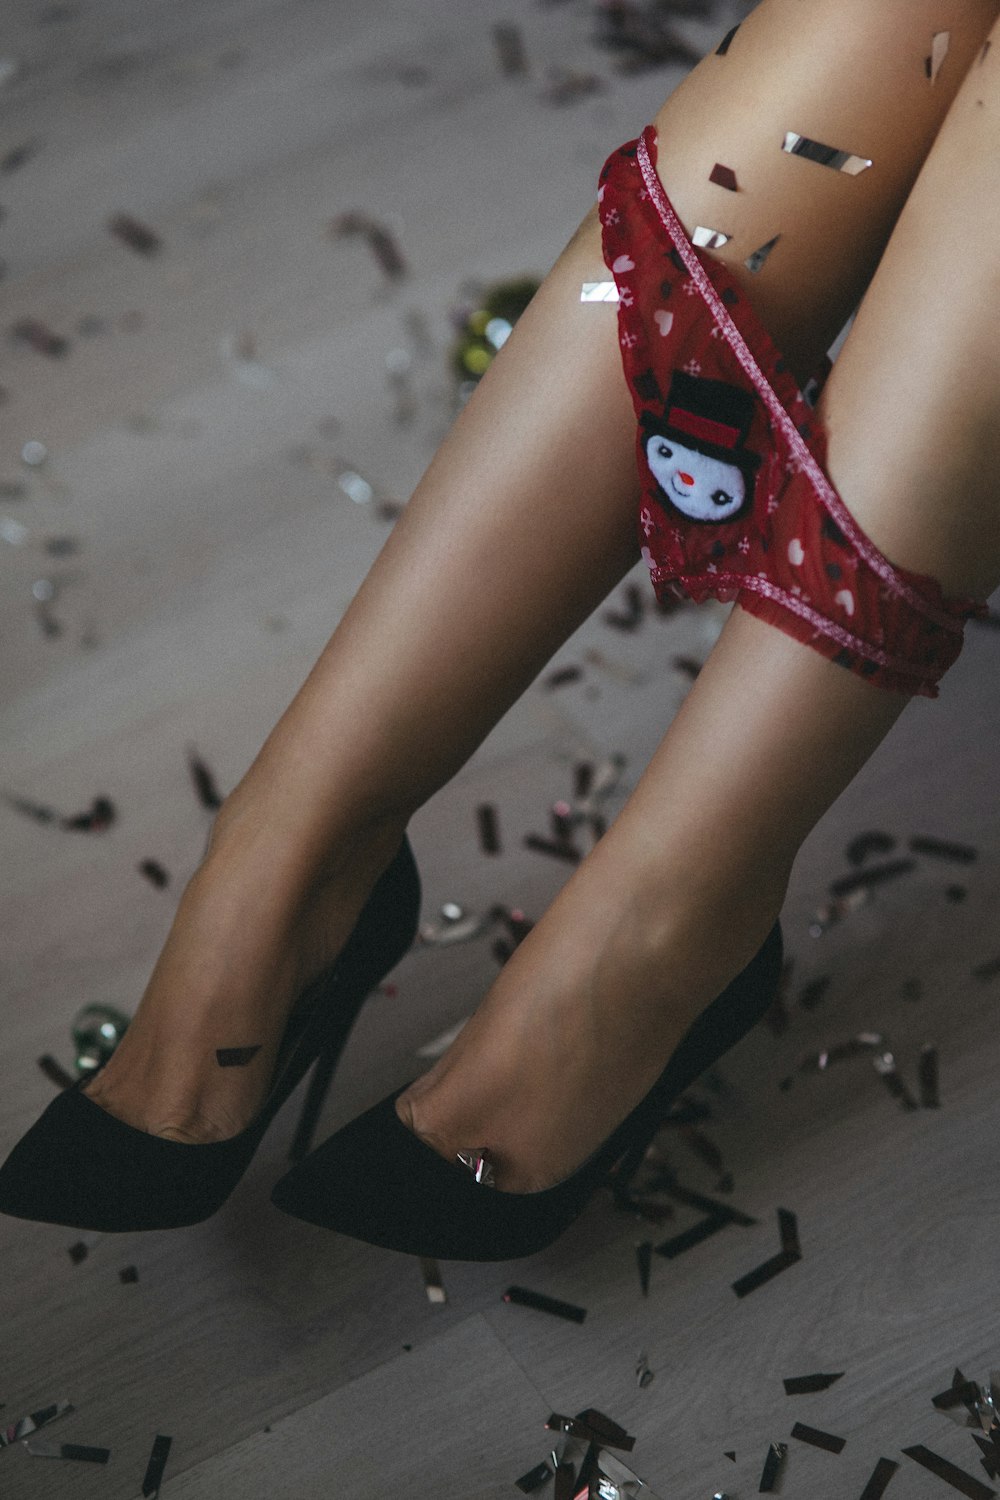 a close up of a person's legs wearing high heels